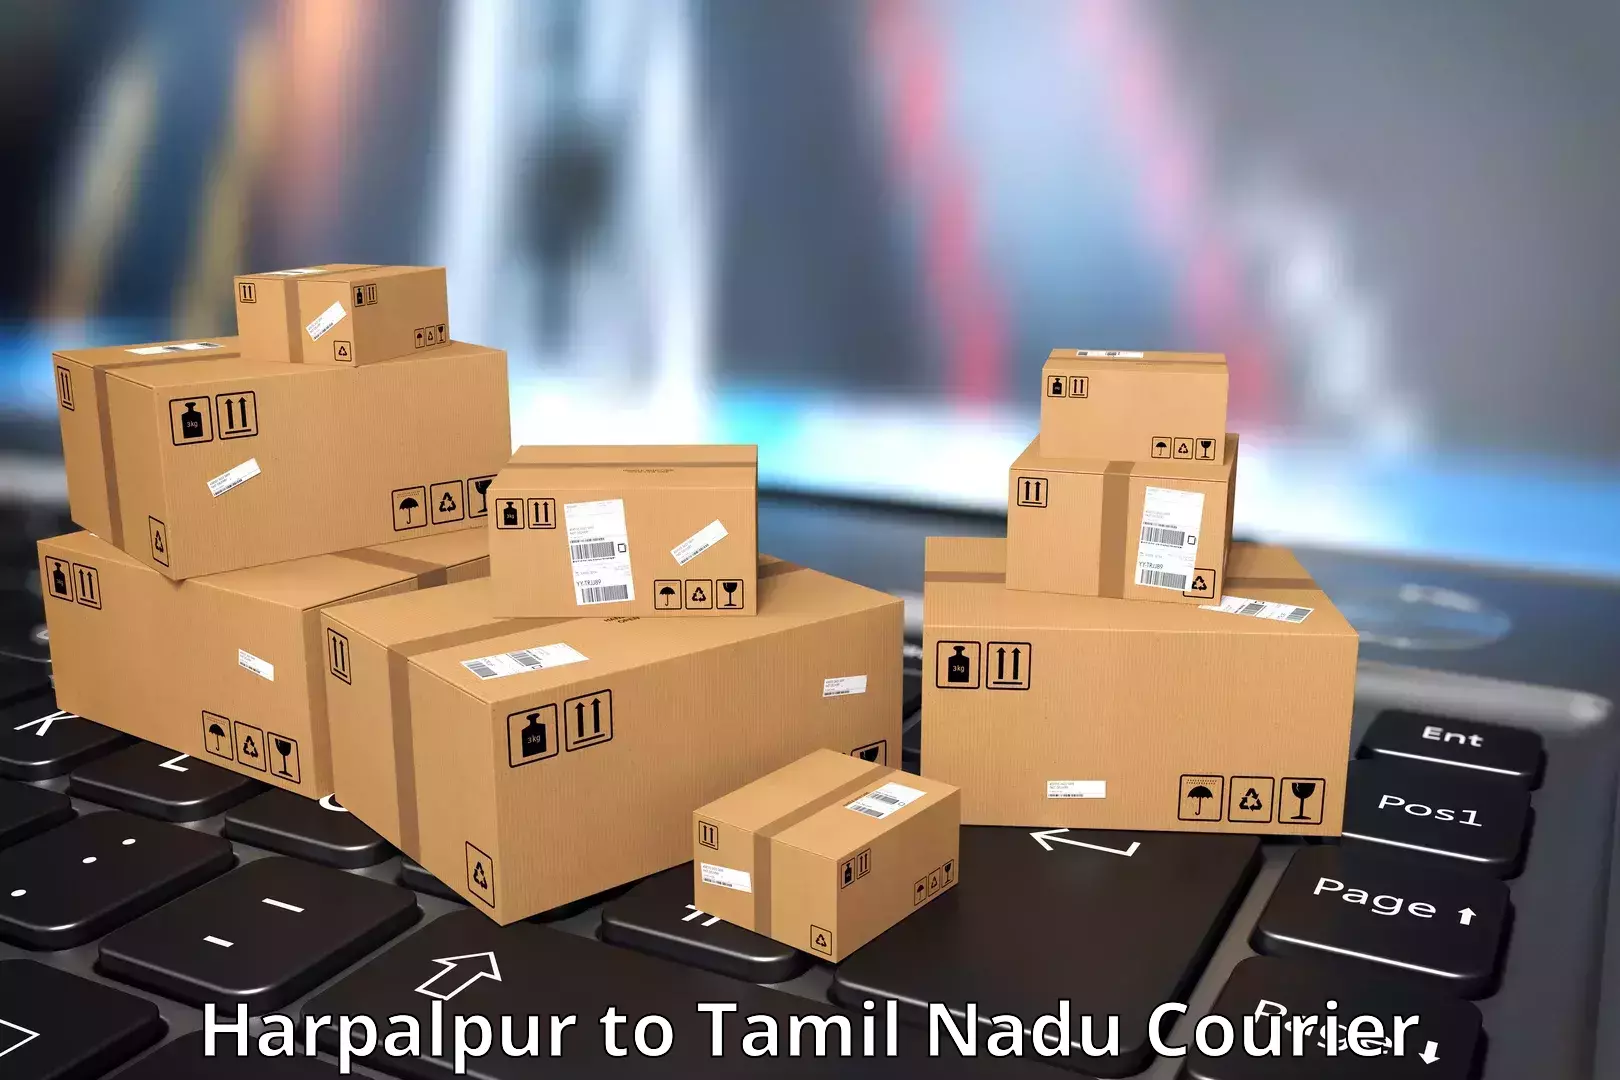 Speedy delivery service Harpalpur to SRM Institute of Science and Technology Chennai